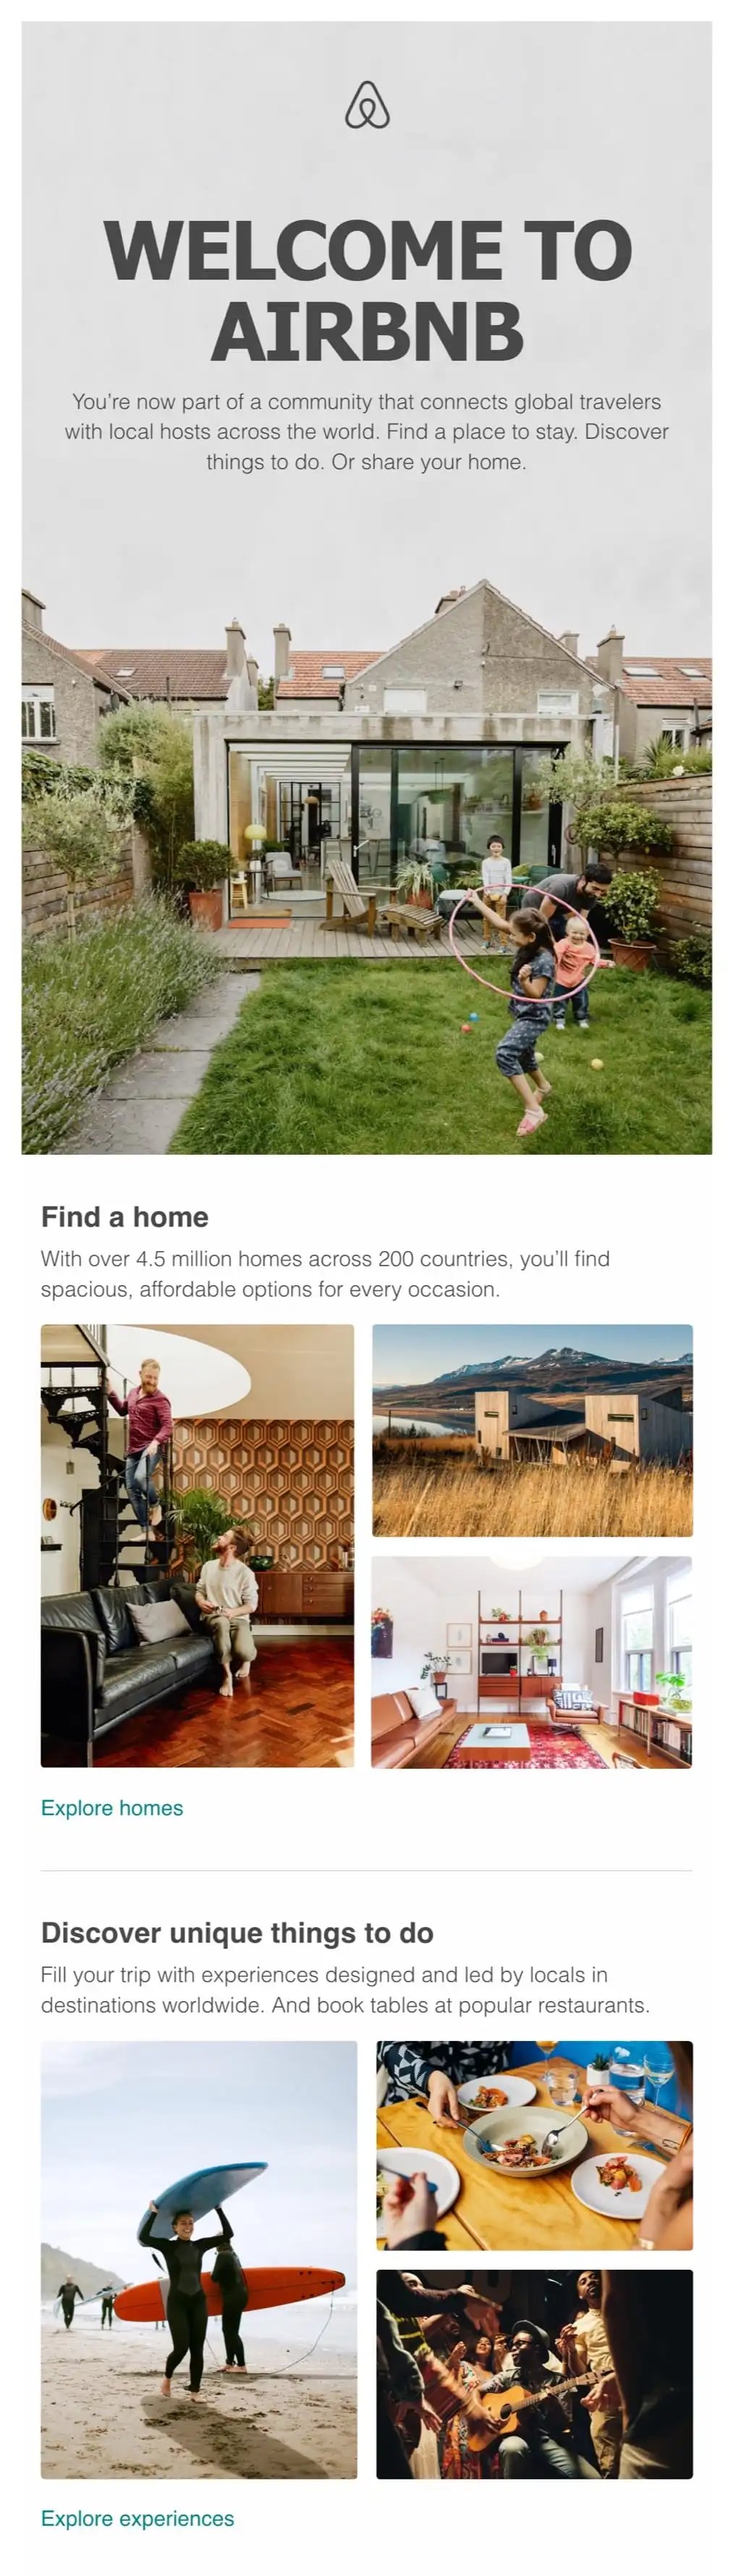 welcome-email-example-airbnb